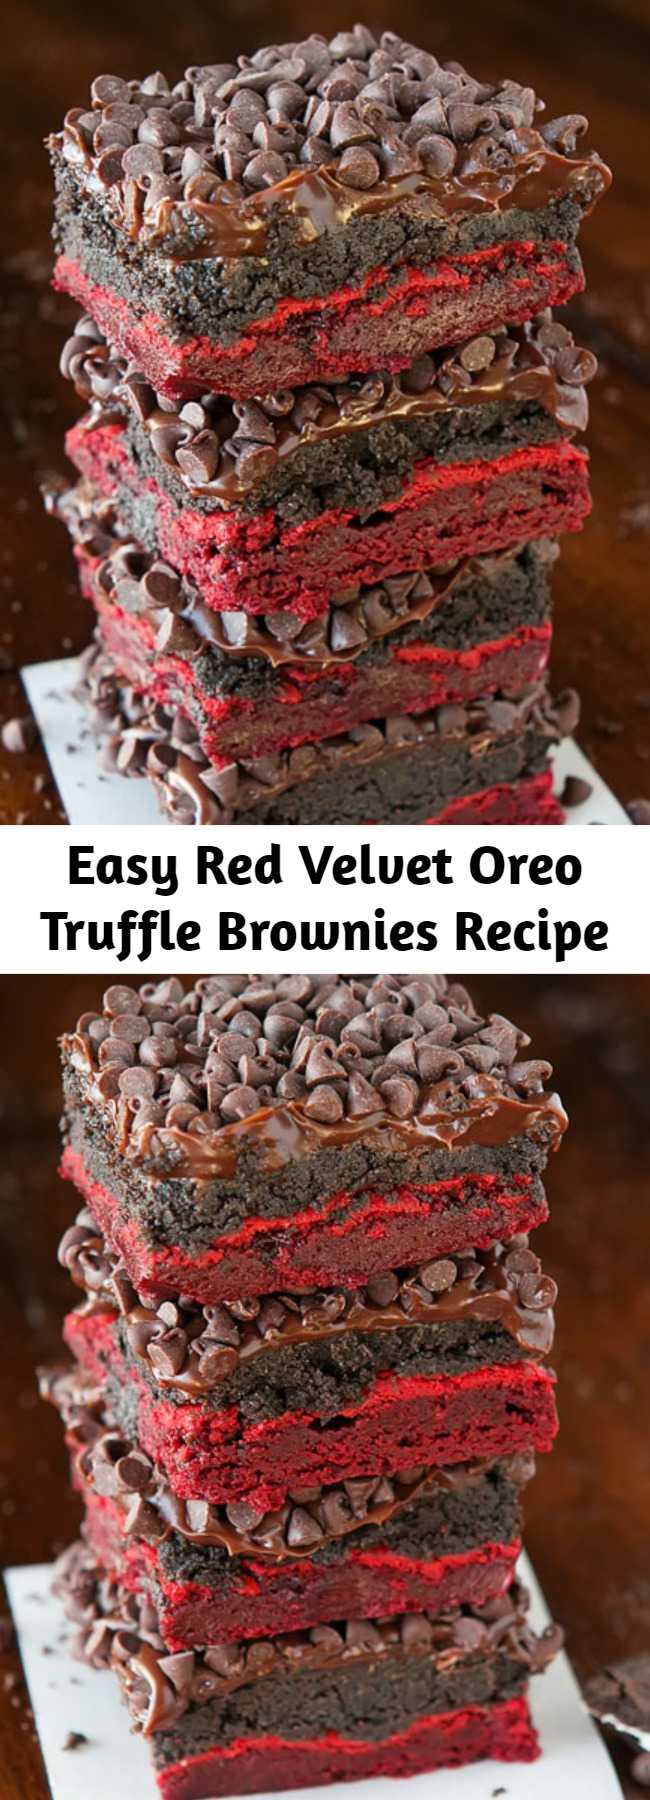 Easy Red Velvet Oreo Truffle Brownies Recipe - These impossibly delicious Red Velvet Oreo Truffle Brownies are so easy to make with red velvet cake mix. Filled with creamy Oreo truffle filling and topped with rich chocolate ganache & chocolate chips, these brownies are ultimate decadence.